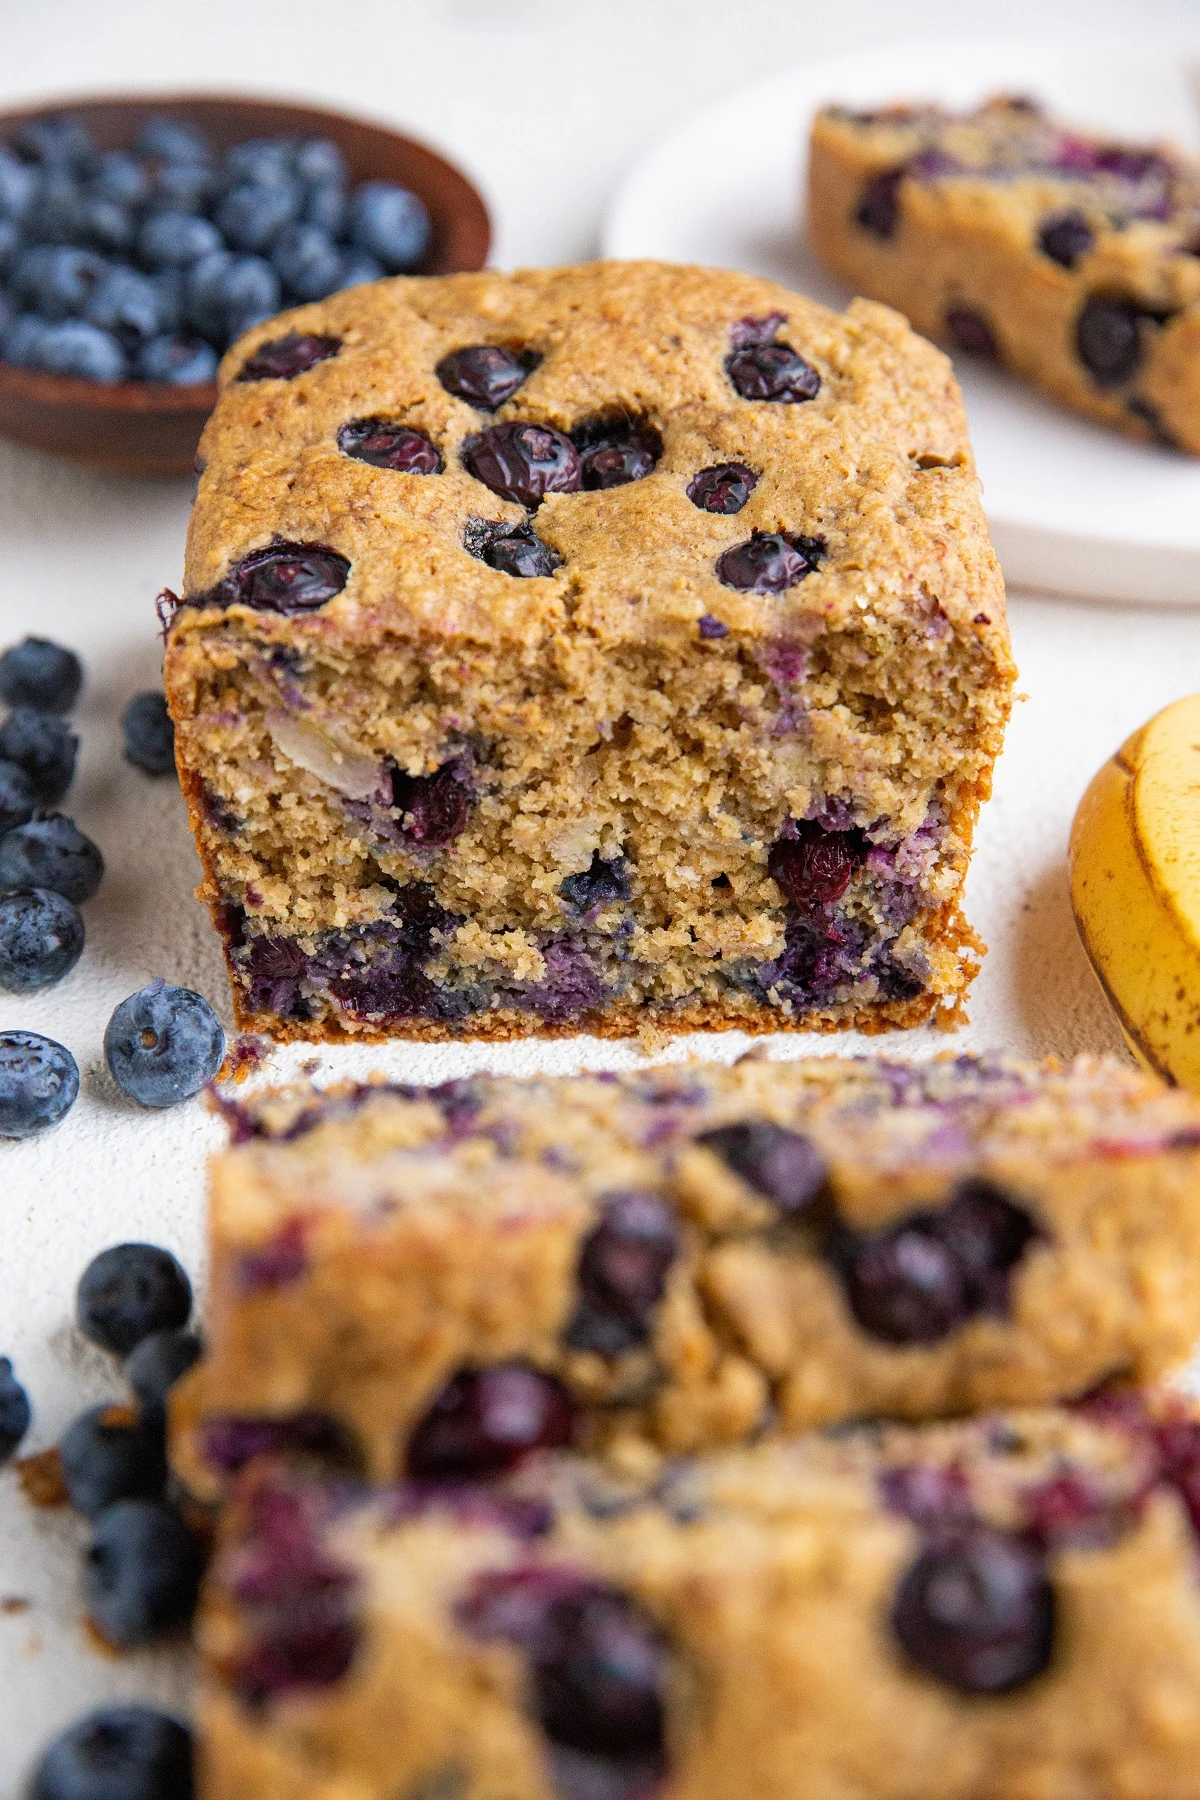 Loaf of blueberry banana bread cut into slices with fresh berries and bananas to the side.